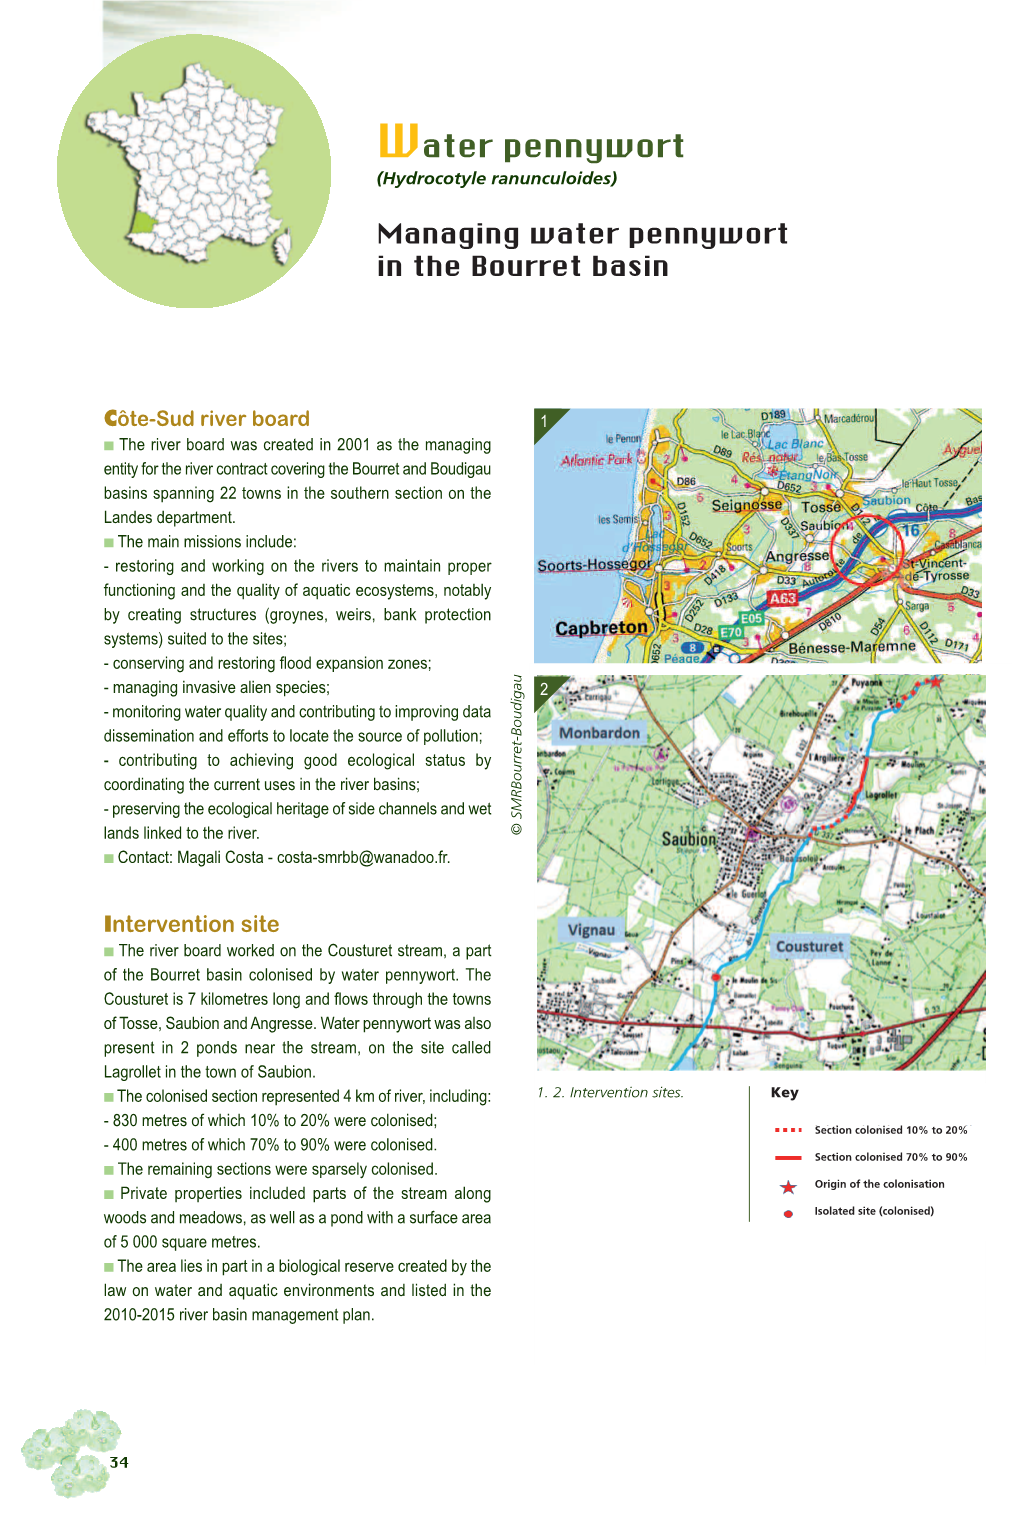 Managing Water Pennywort in the Bourret Basin